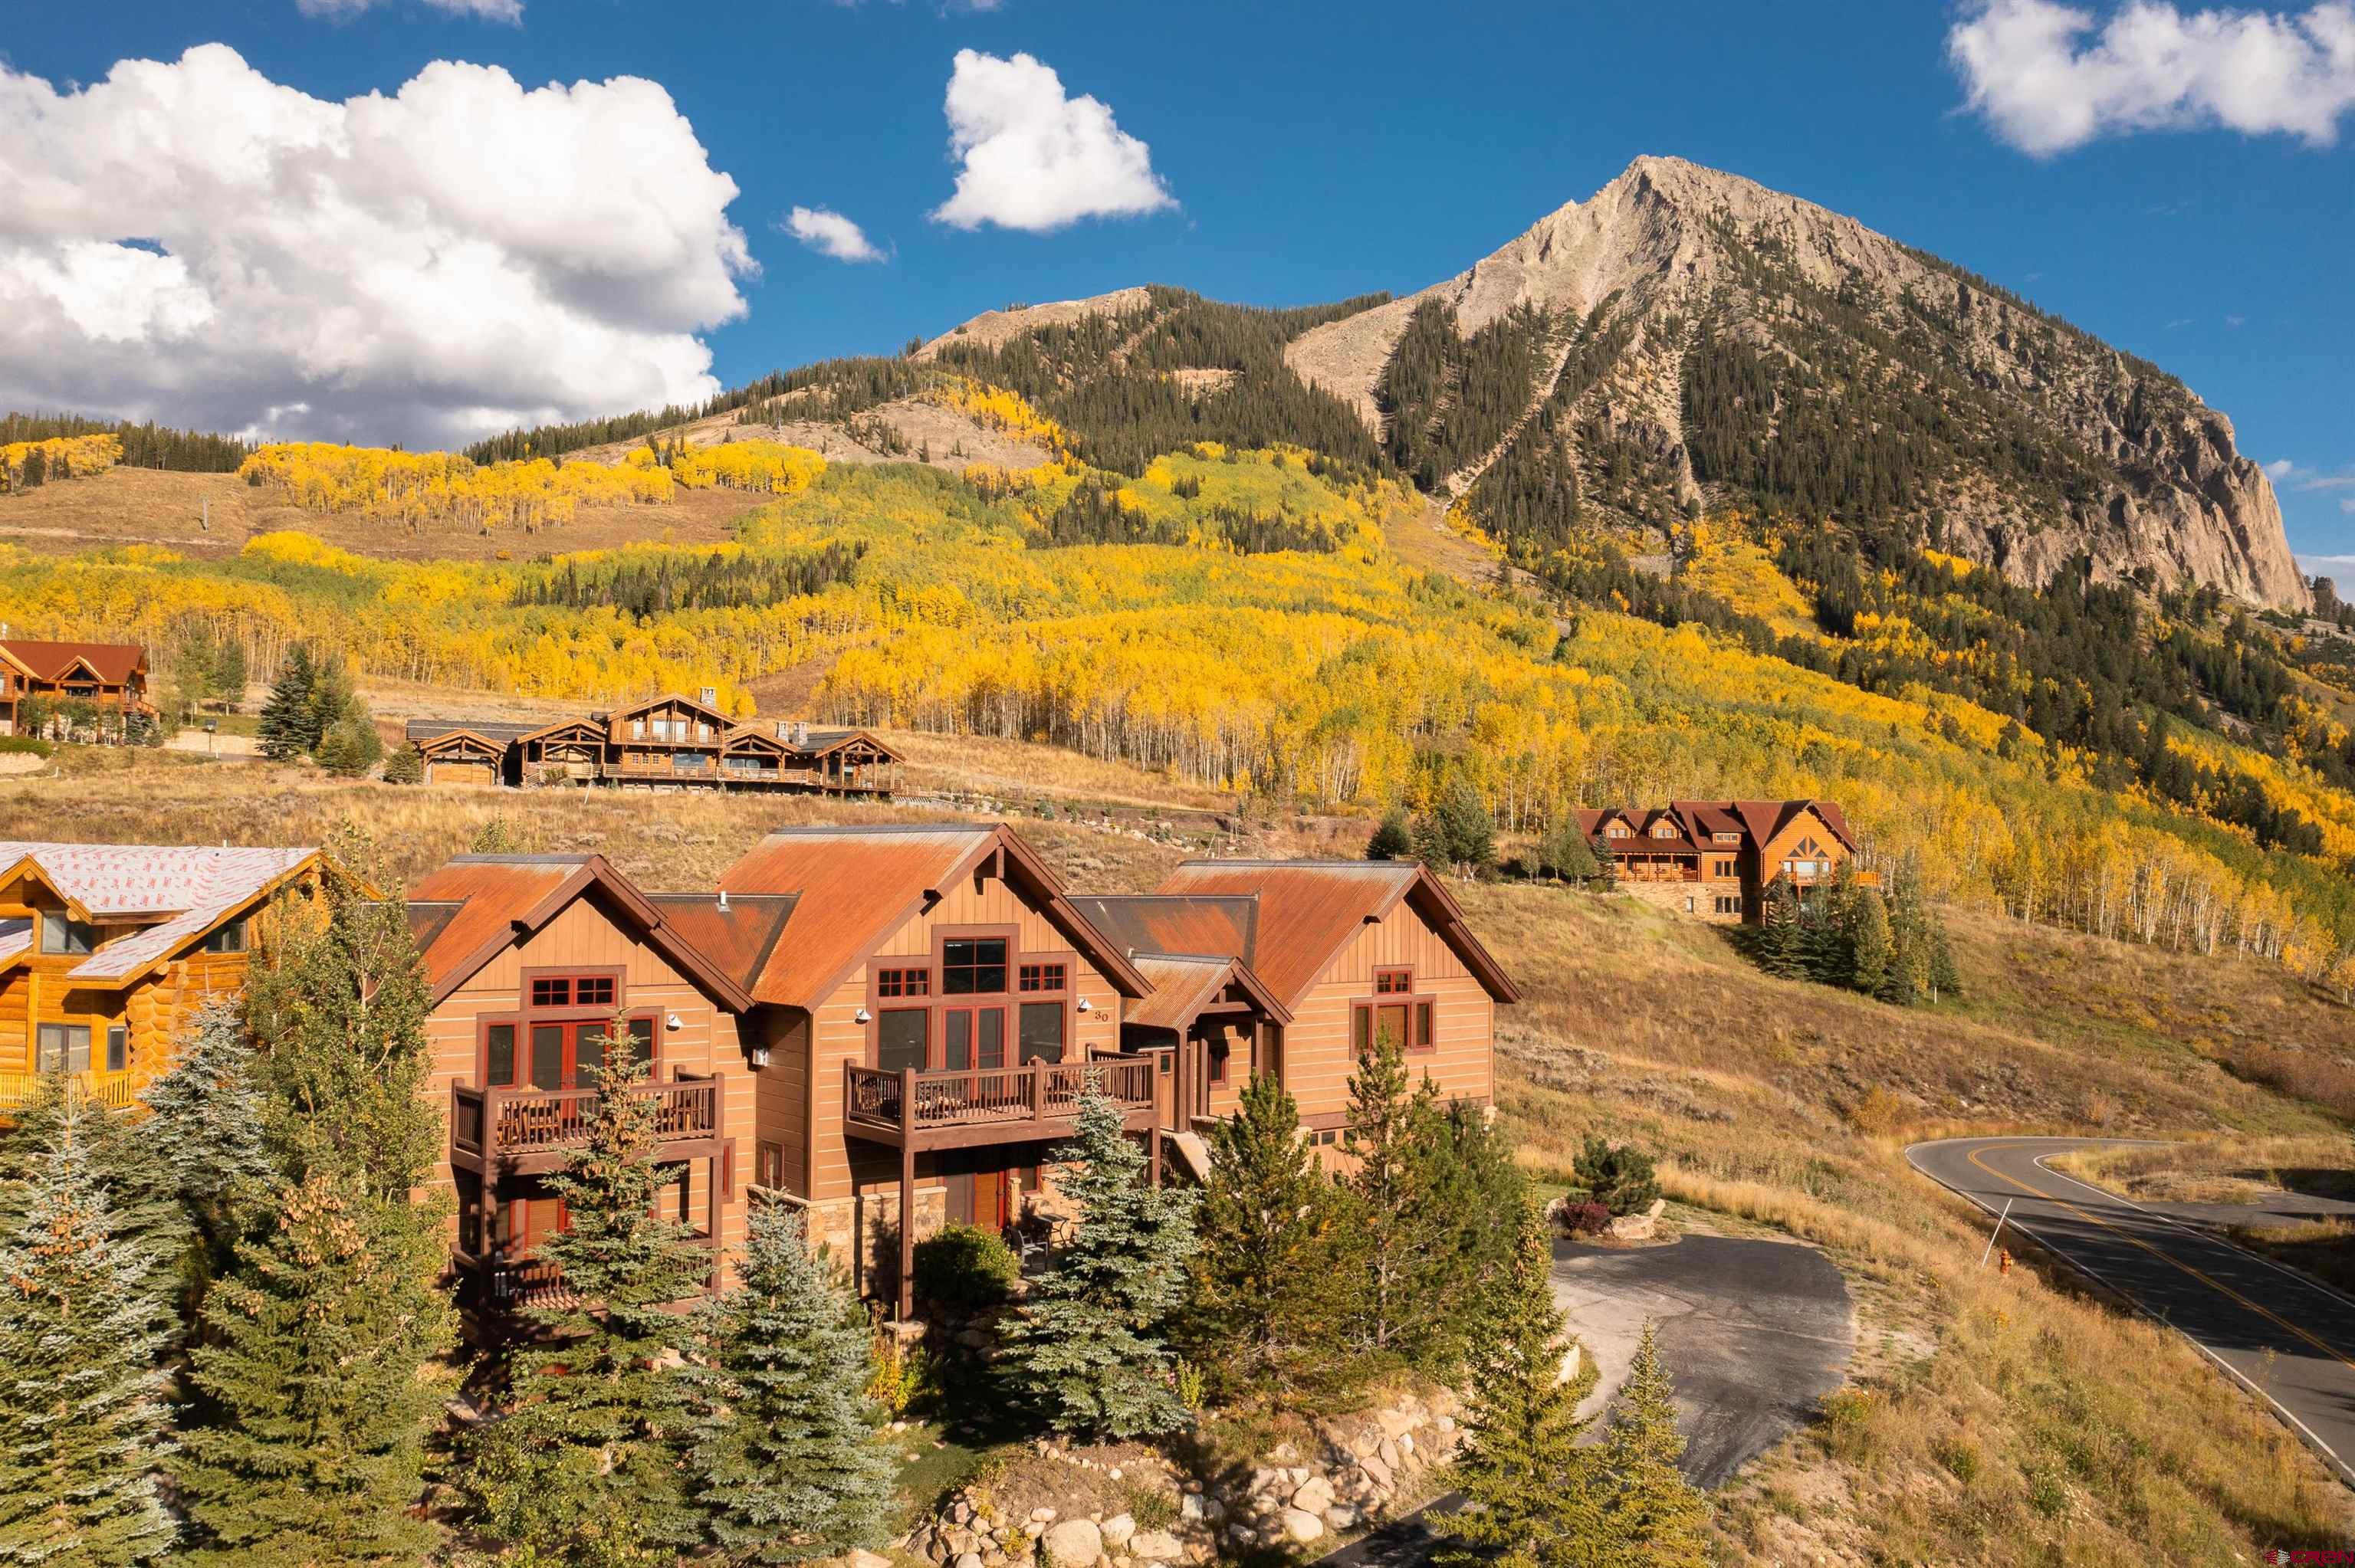 30 Summit Road, Mt. Crested Butte, CO 